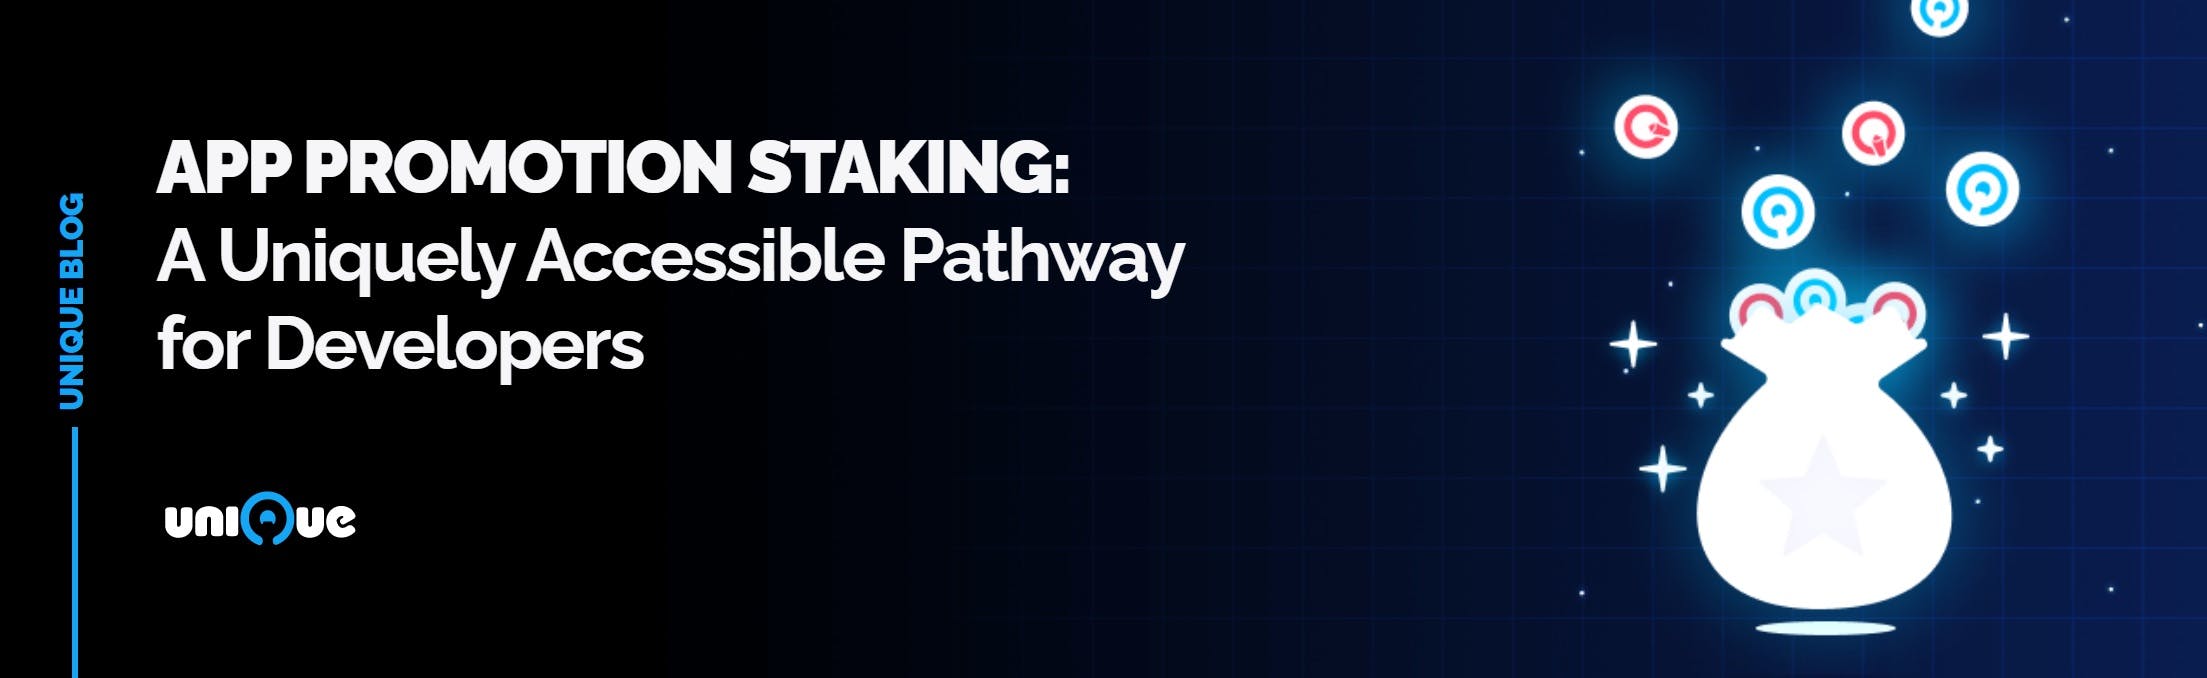 App Promotion Staking: A Uniquely Accessible Pathway for Developers